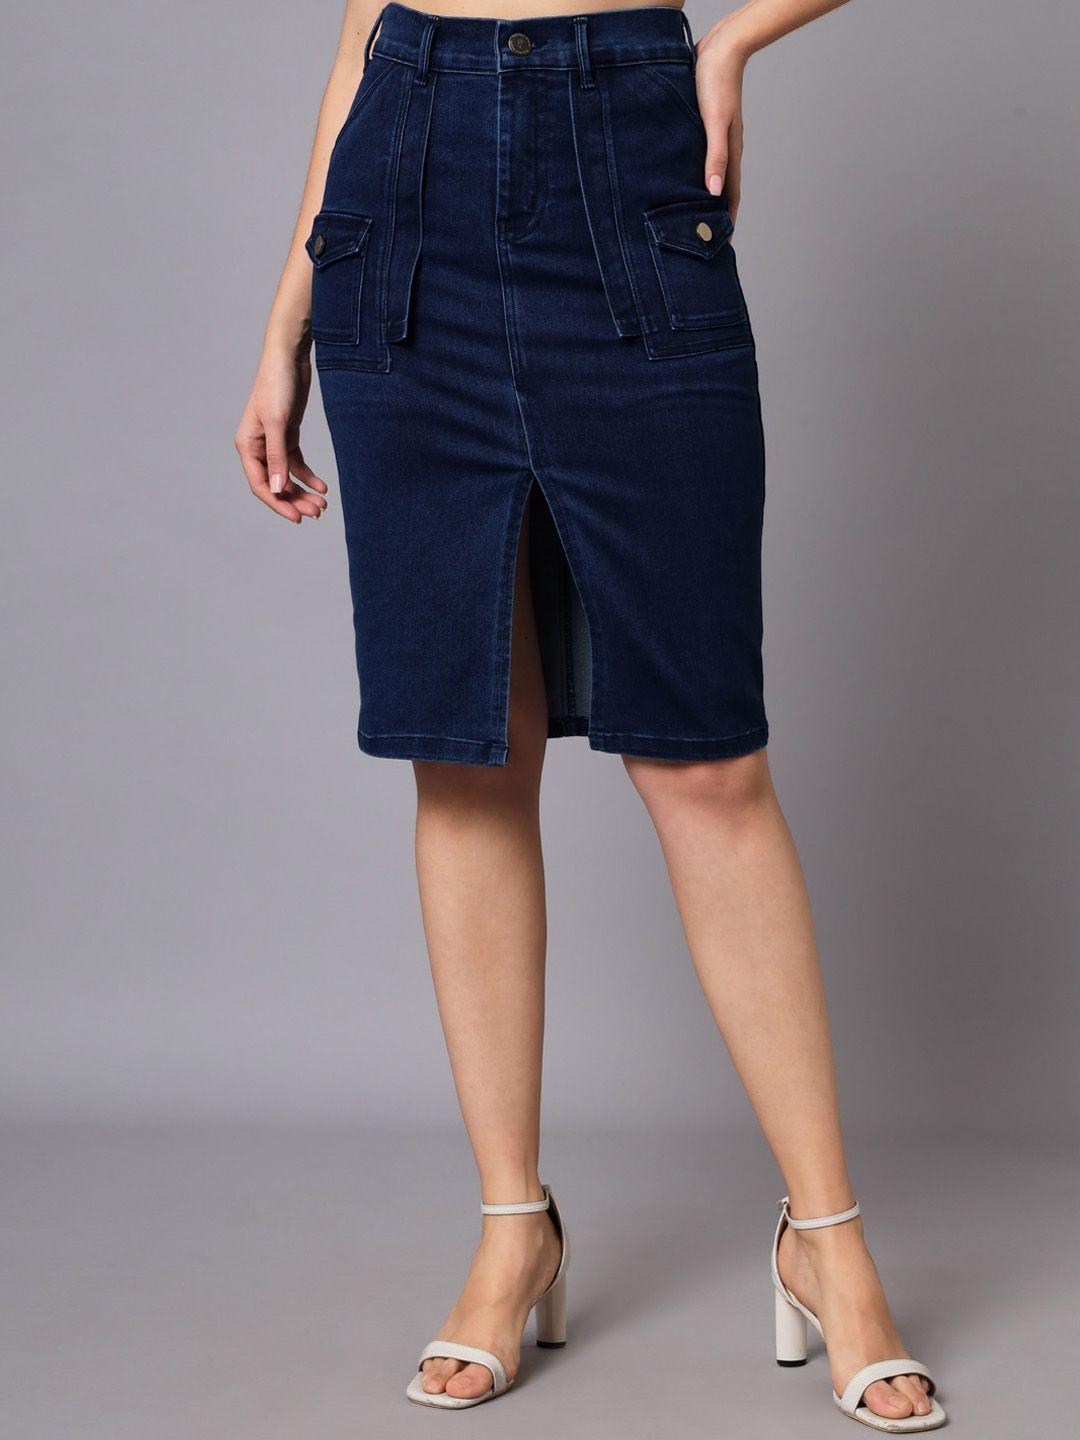 the-dry-state-knee-length-pure-cotton-denim-skirts